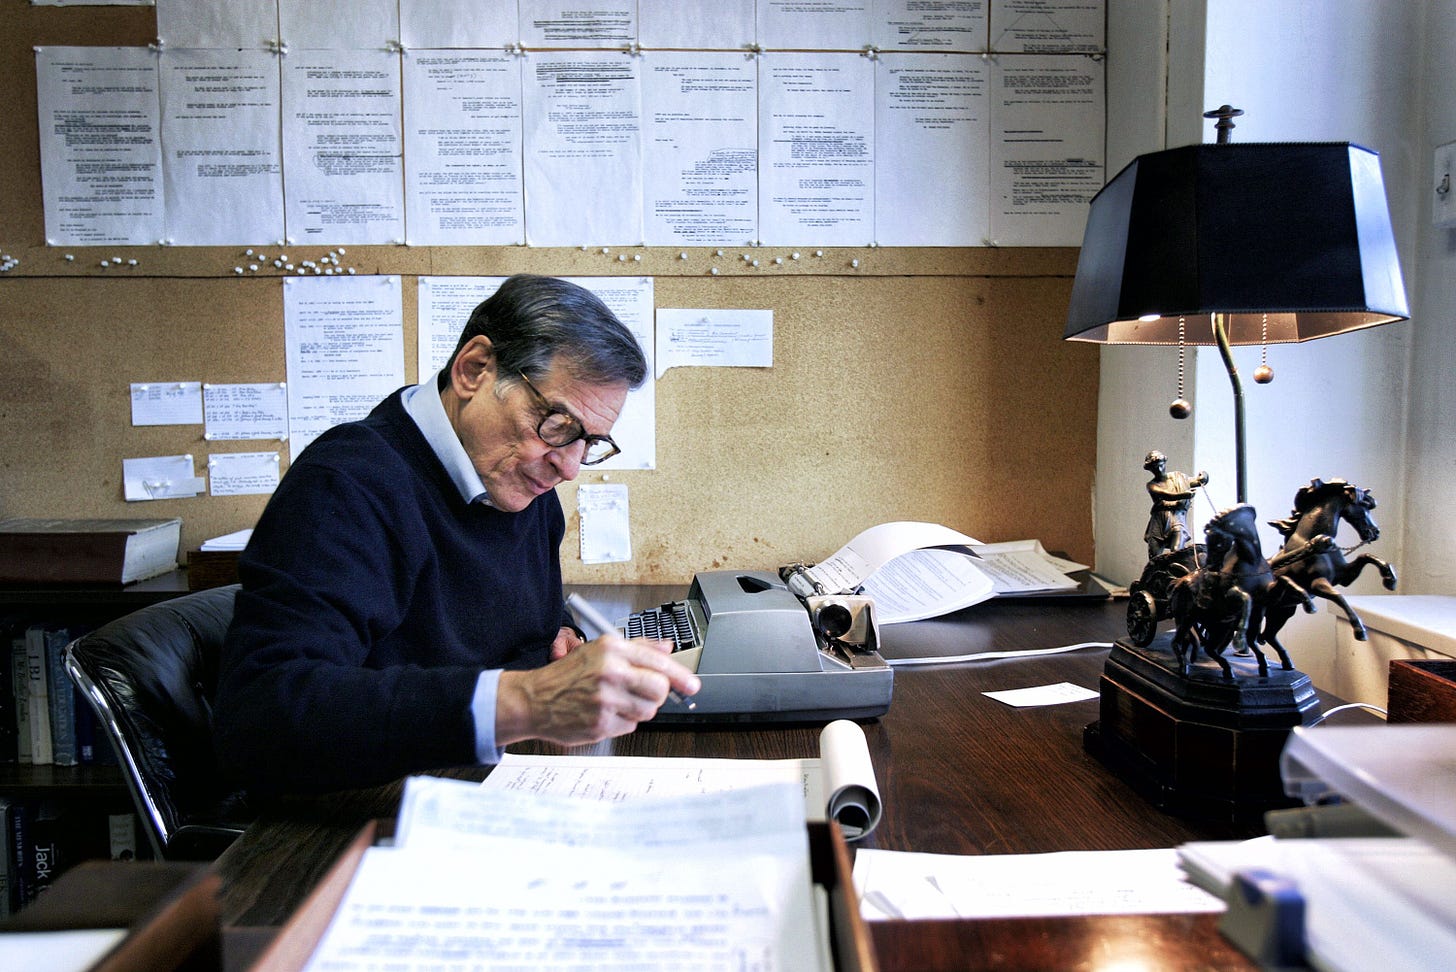 A photograph of the author Robert A. Caro at work in his office.